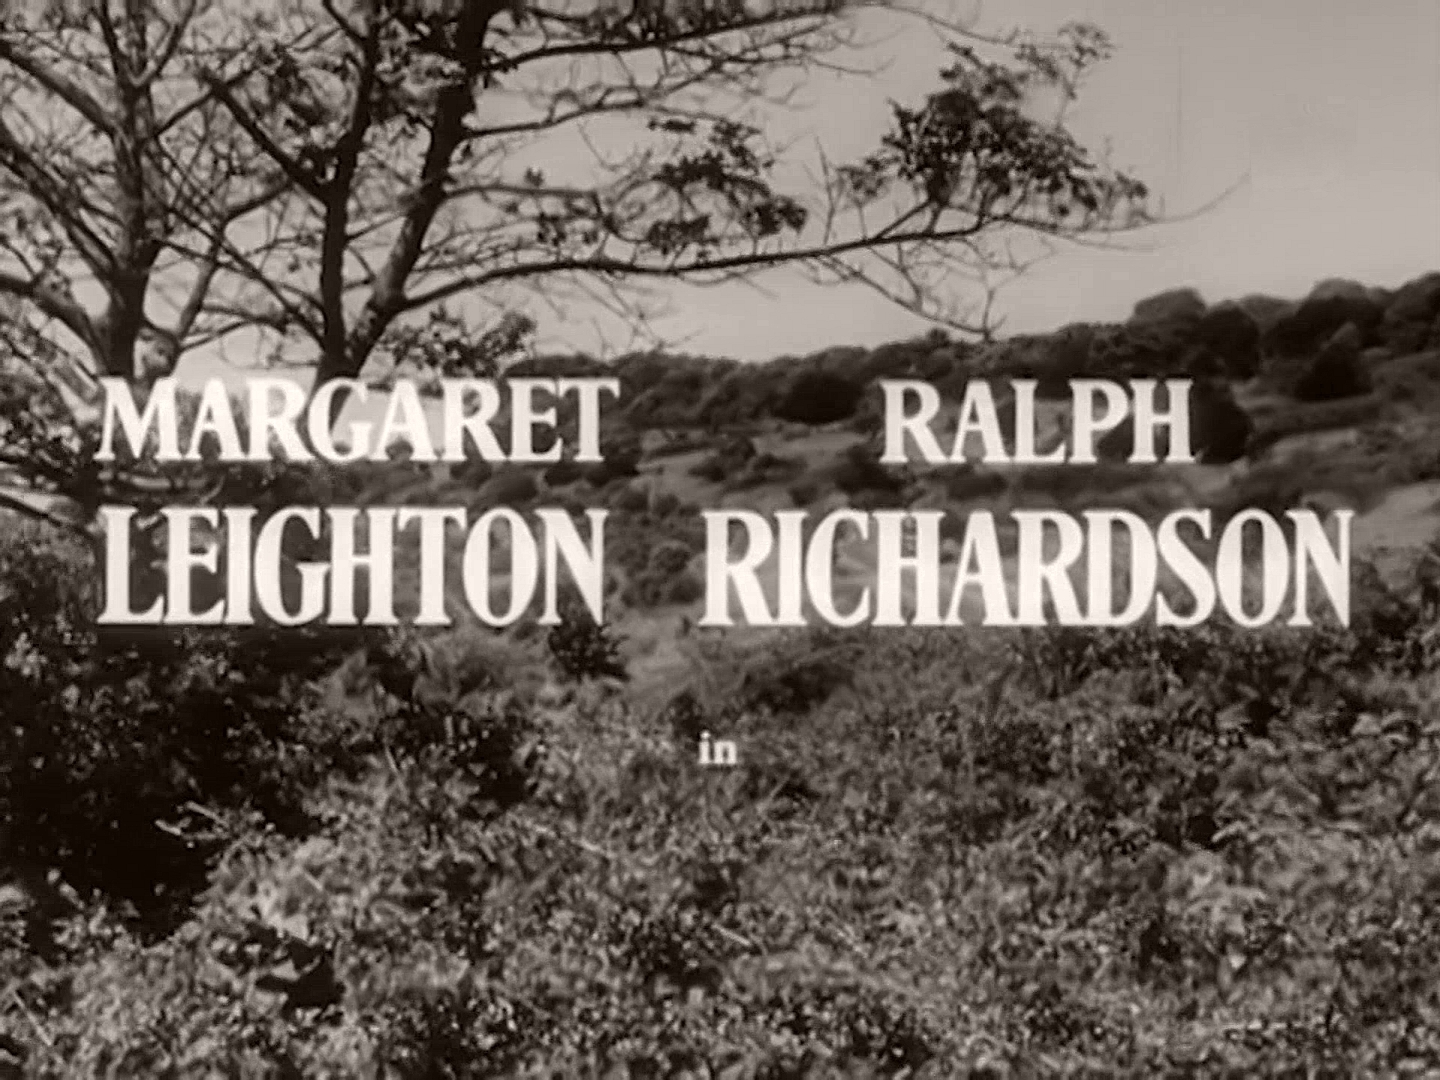 Main title from The Passionate Stranger (1957) (3). Margaret Leighton, Ralph Richardson in